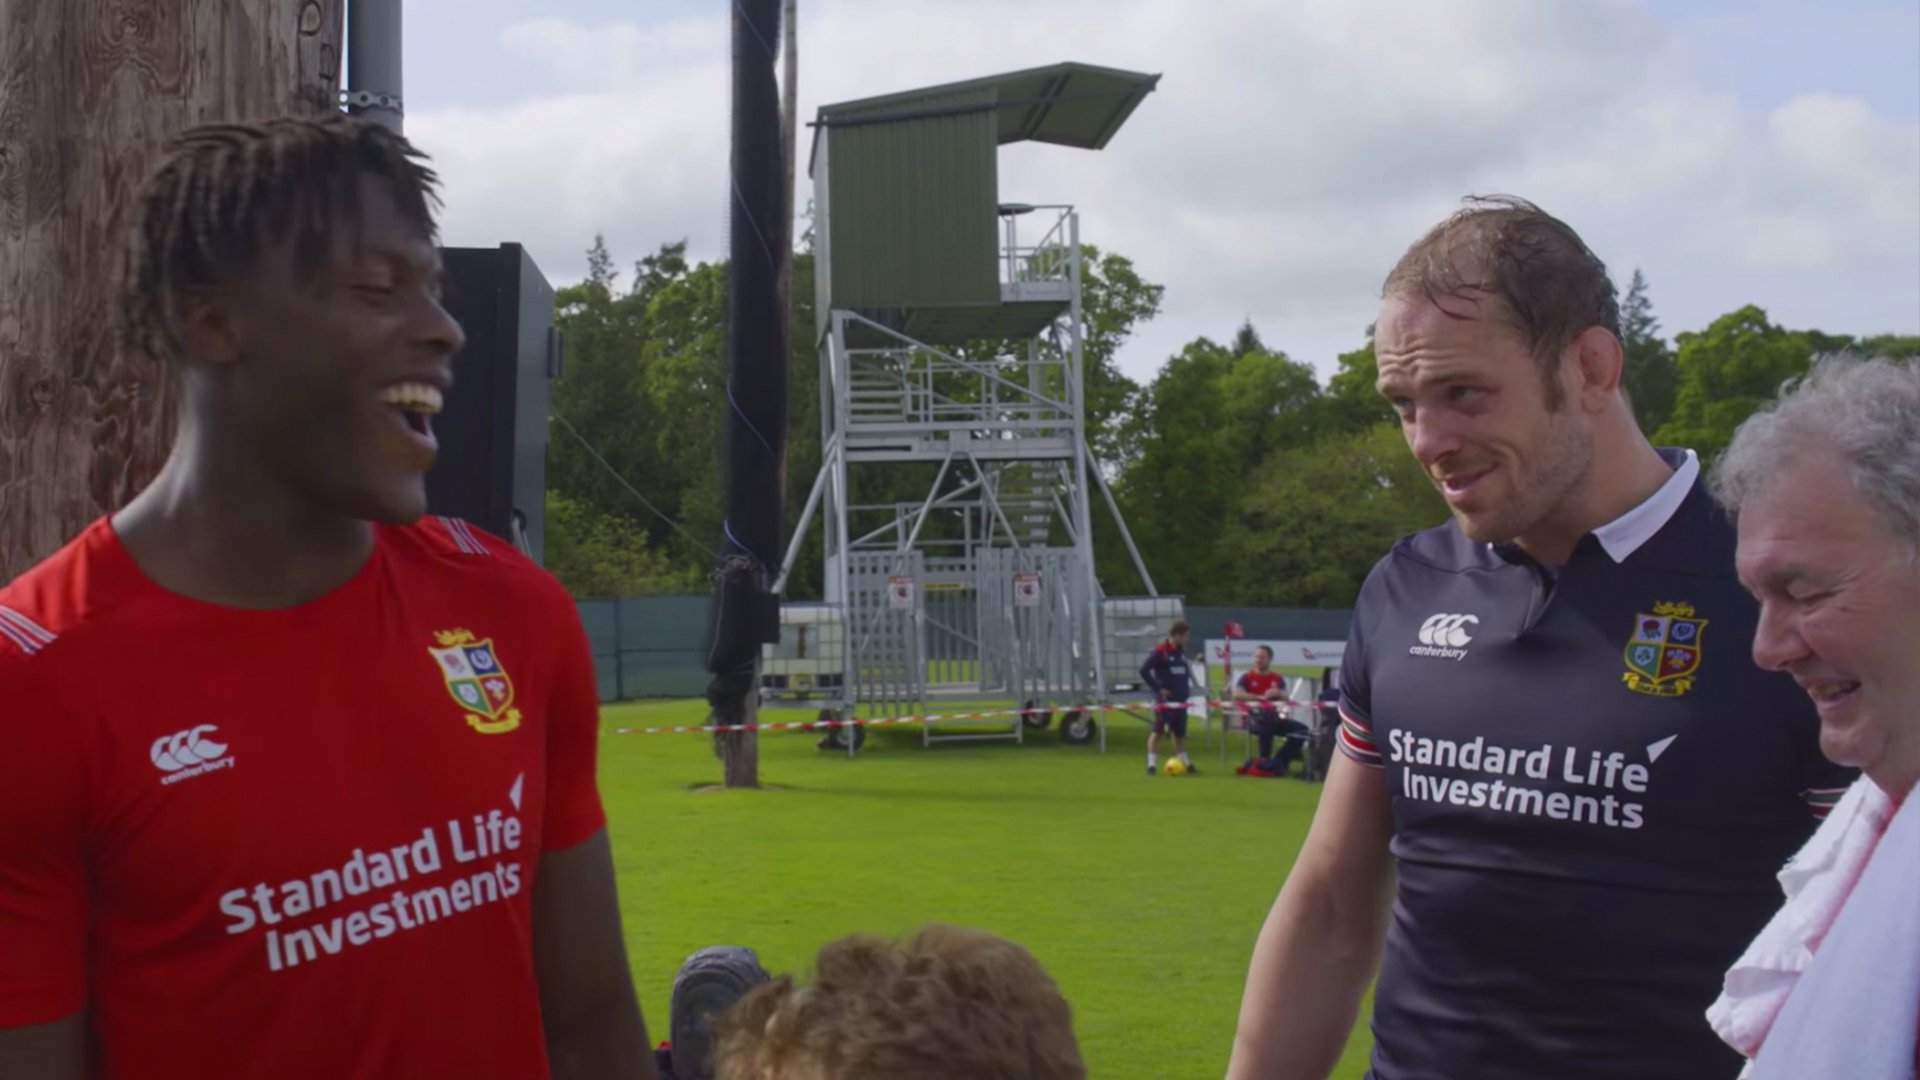 The blossoming bromance between Maro Itoje and Alun Wyn Jones